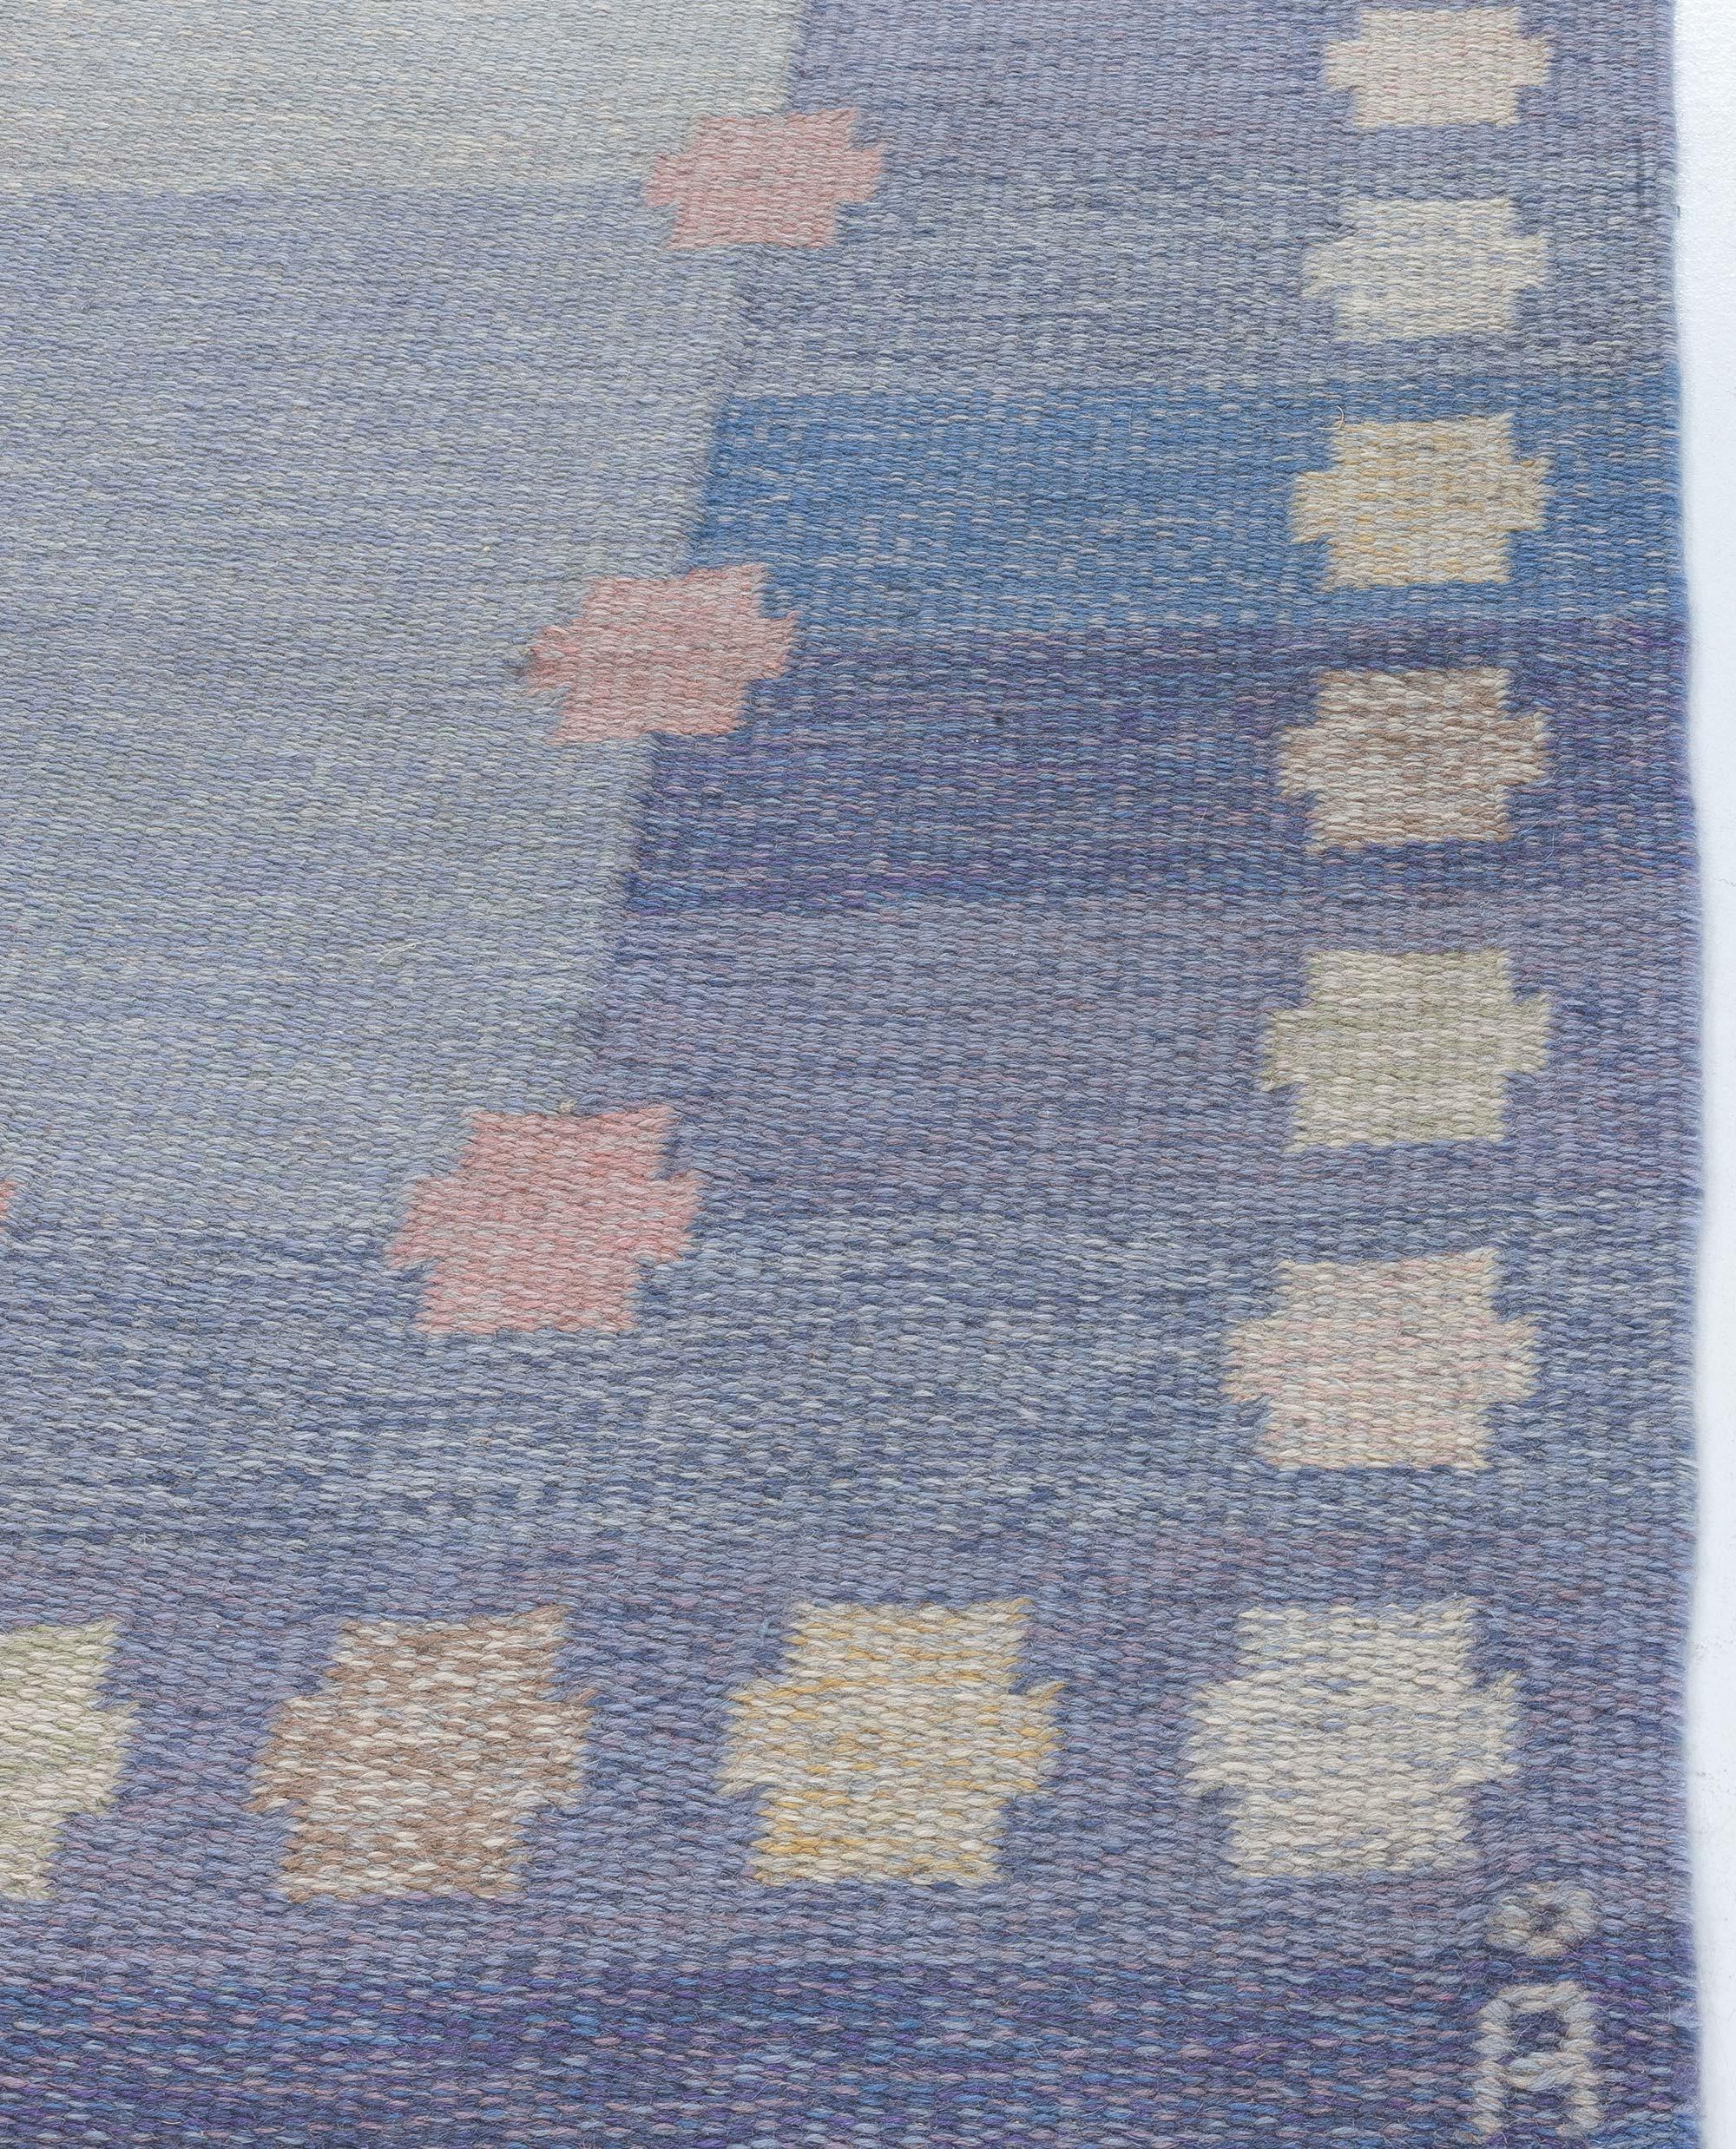 Hand-Woven Mid-20th Century Swedish Flat Woven Rug by Agda Osterberg For Sale